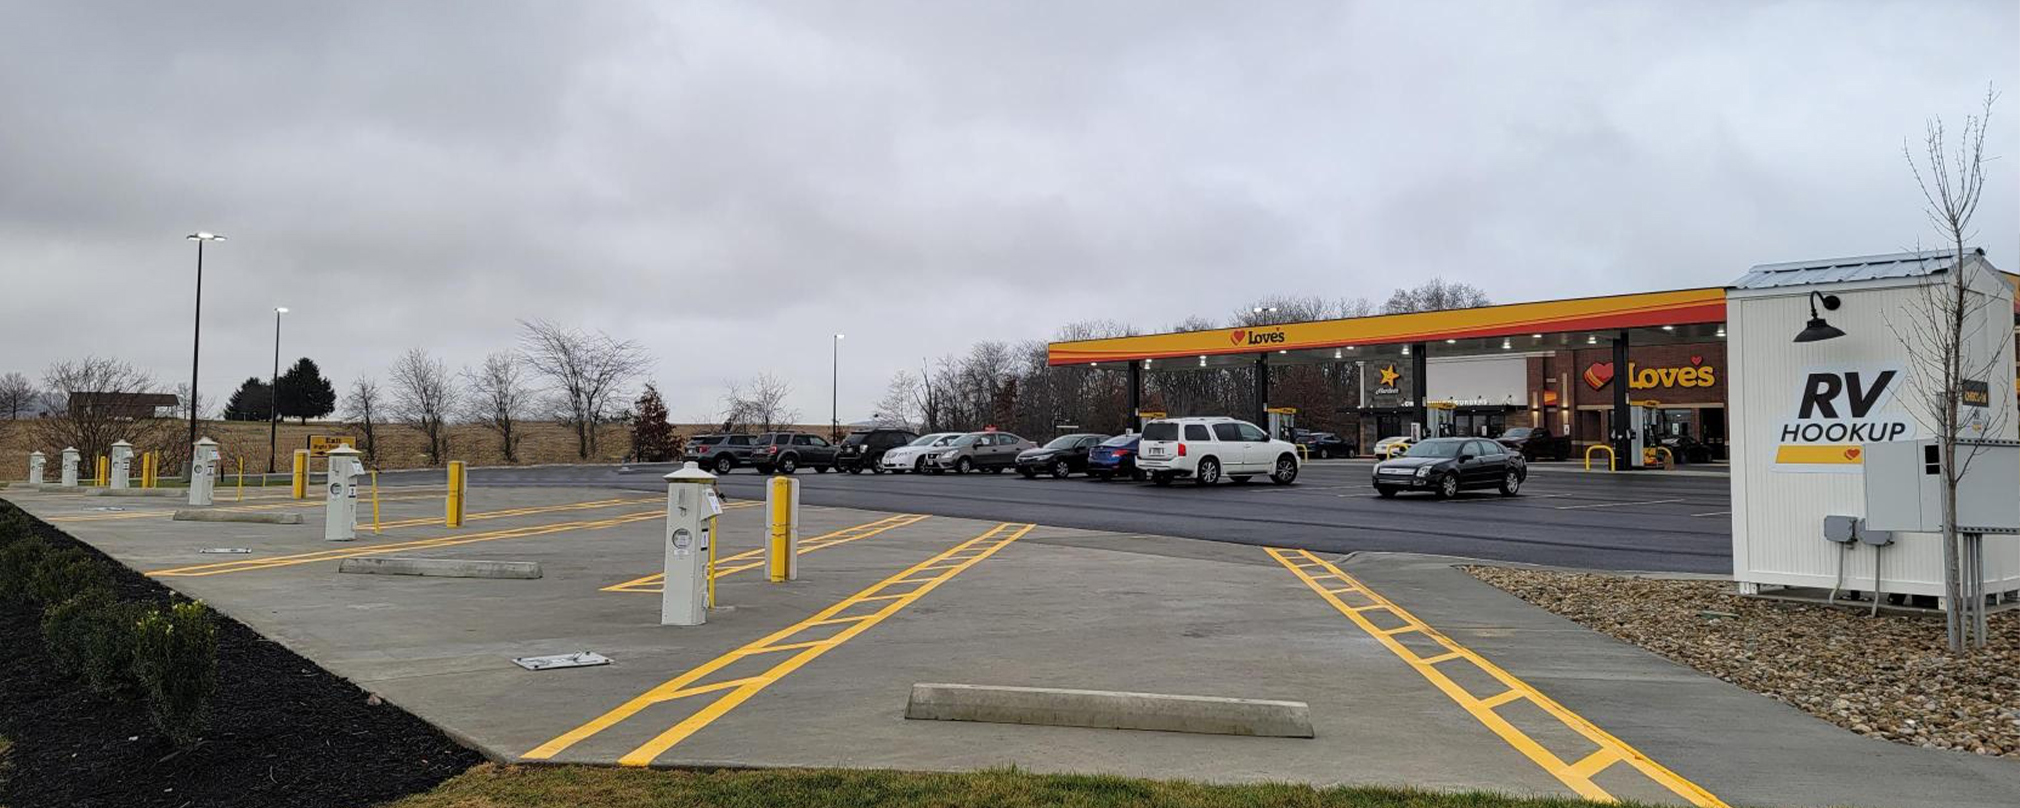 Truck stop parking fills up earlier, more often at chains